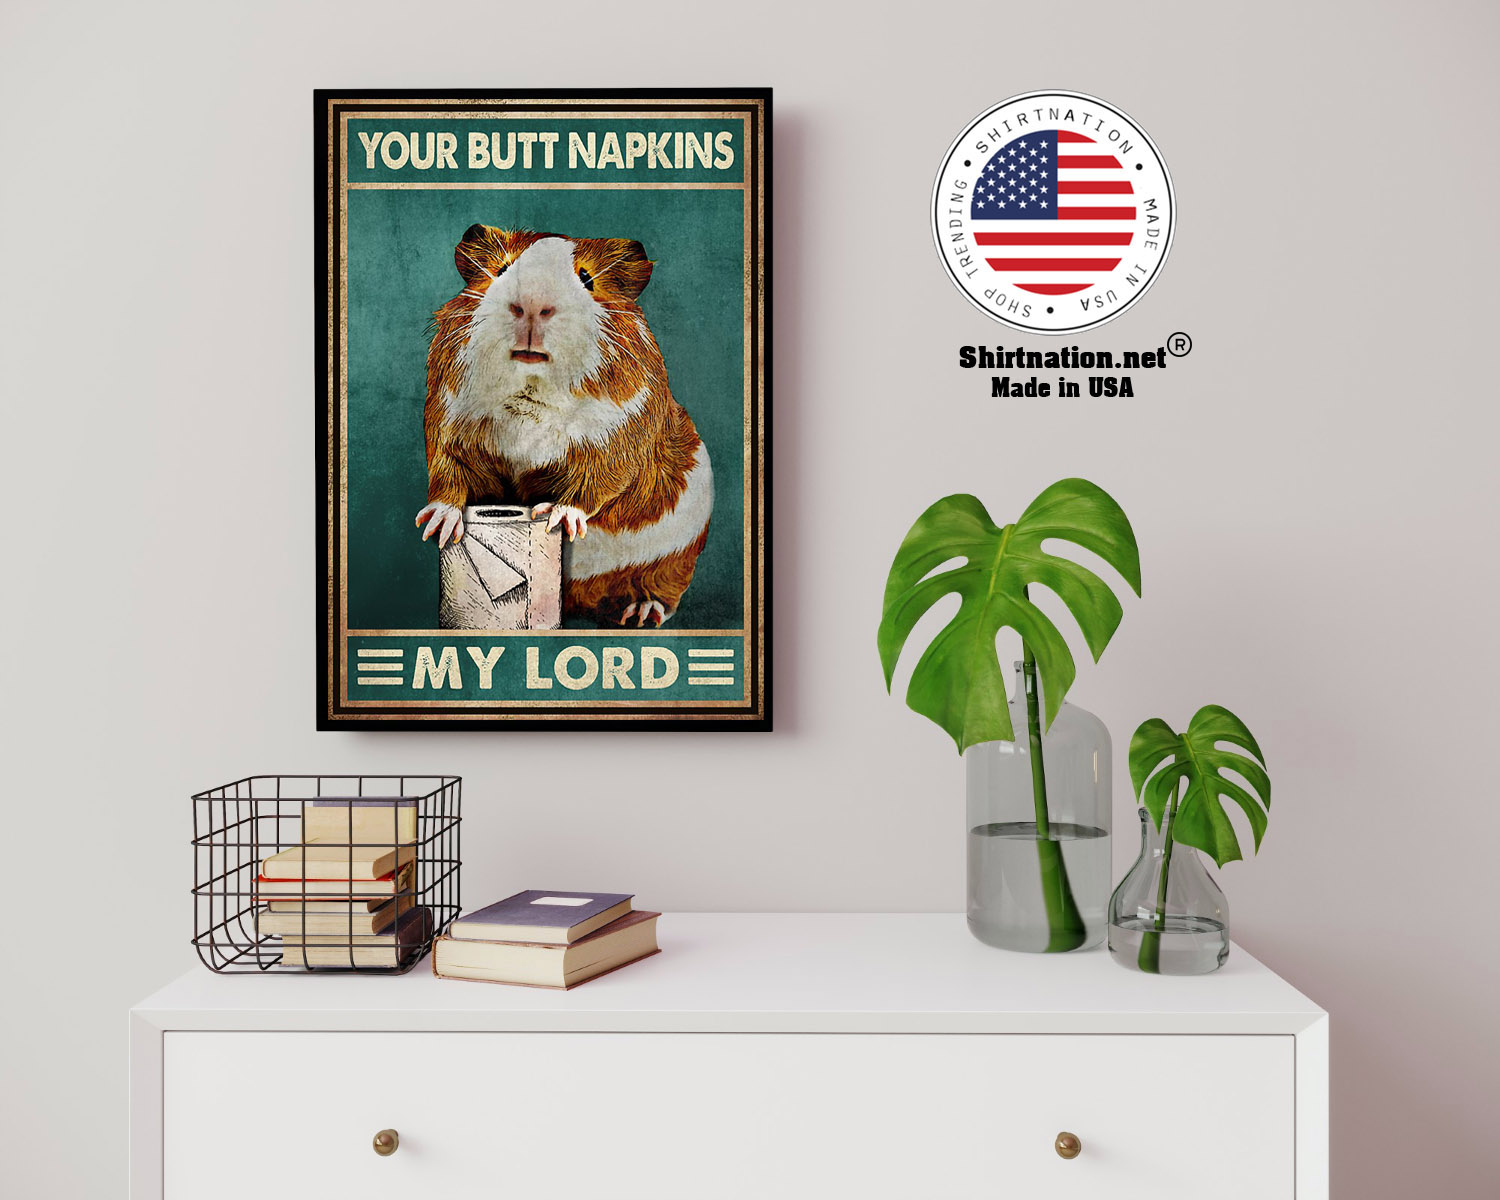 Mouse Guinea pig Your butt napkins my lord poster 14